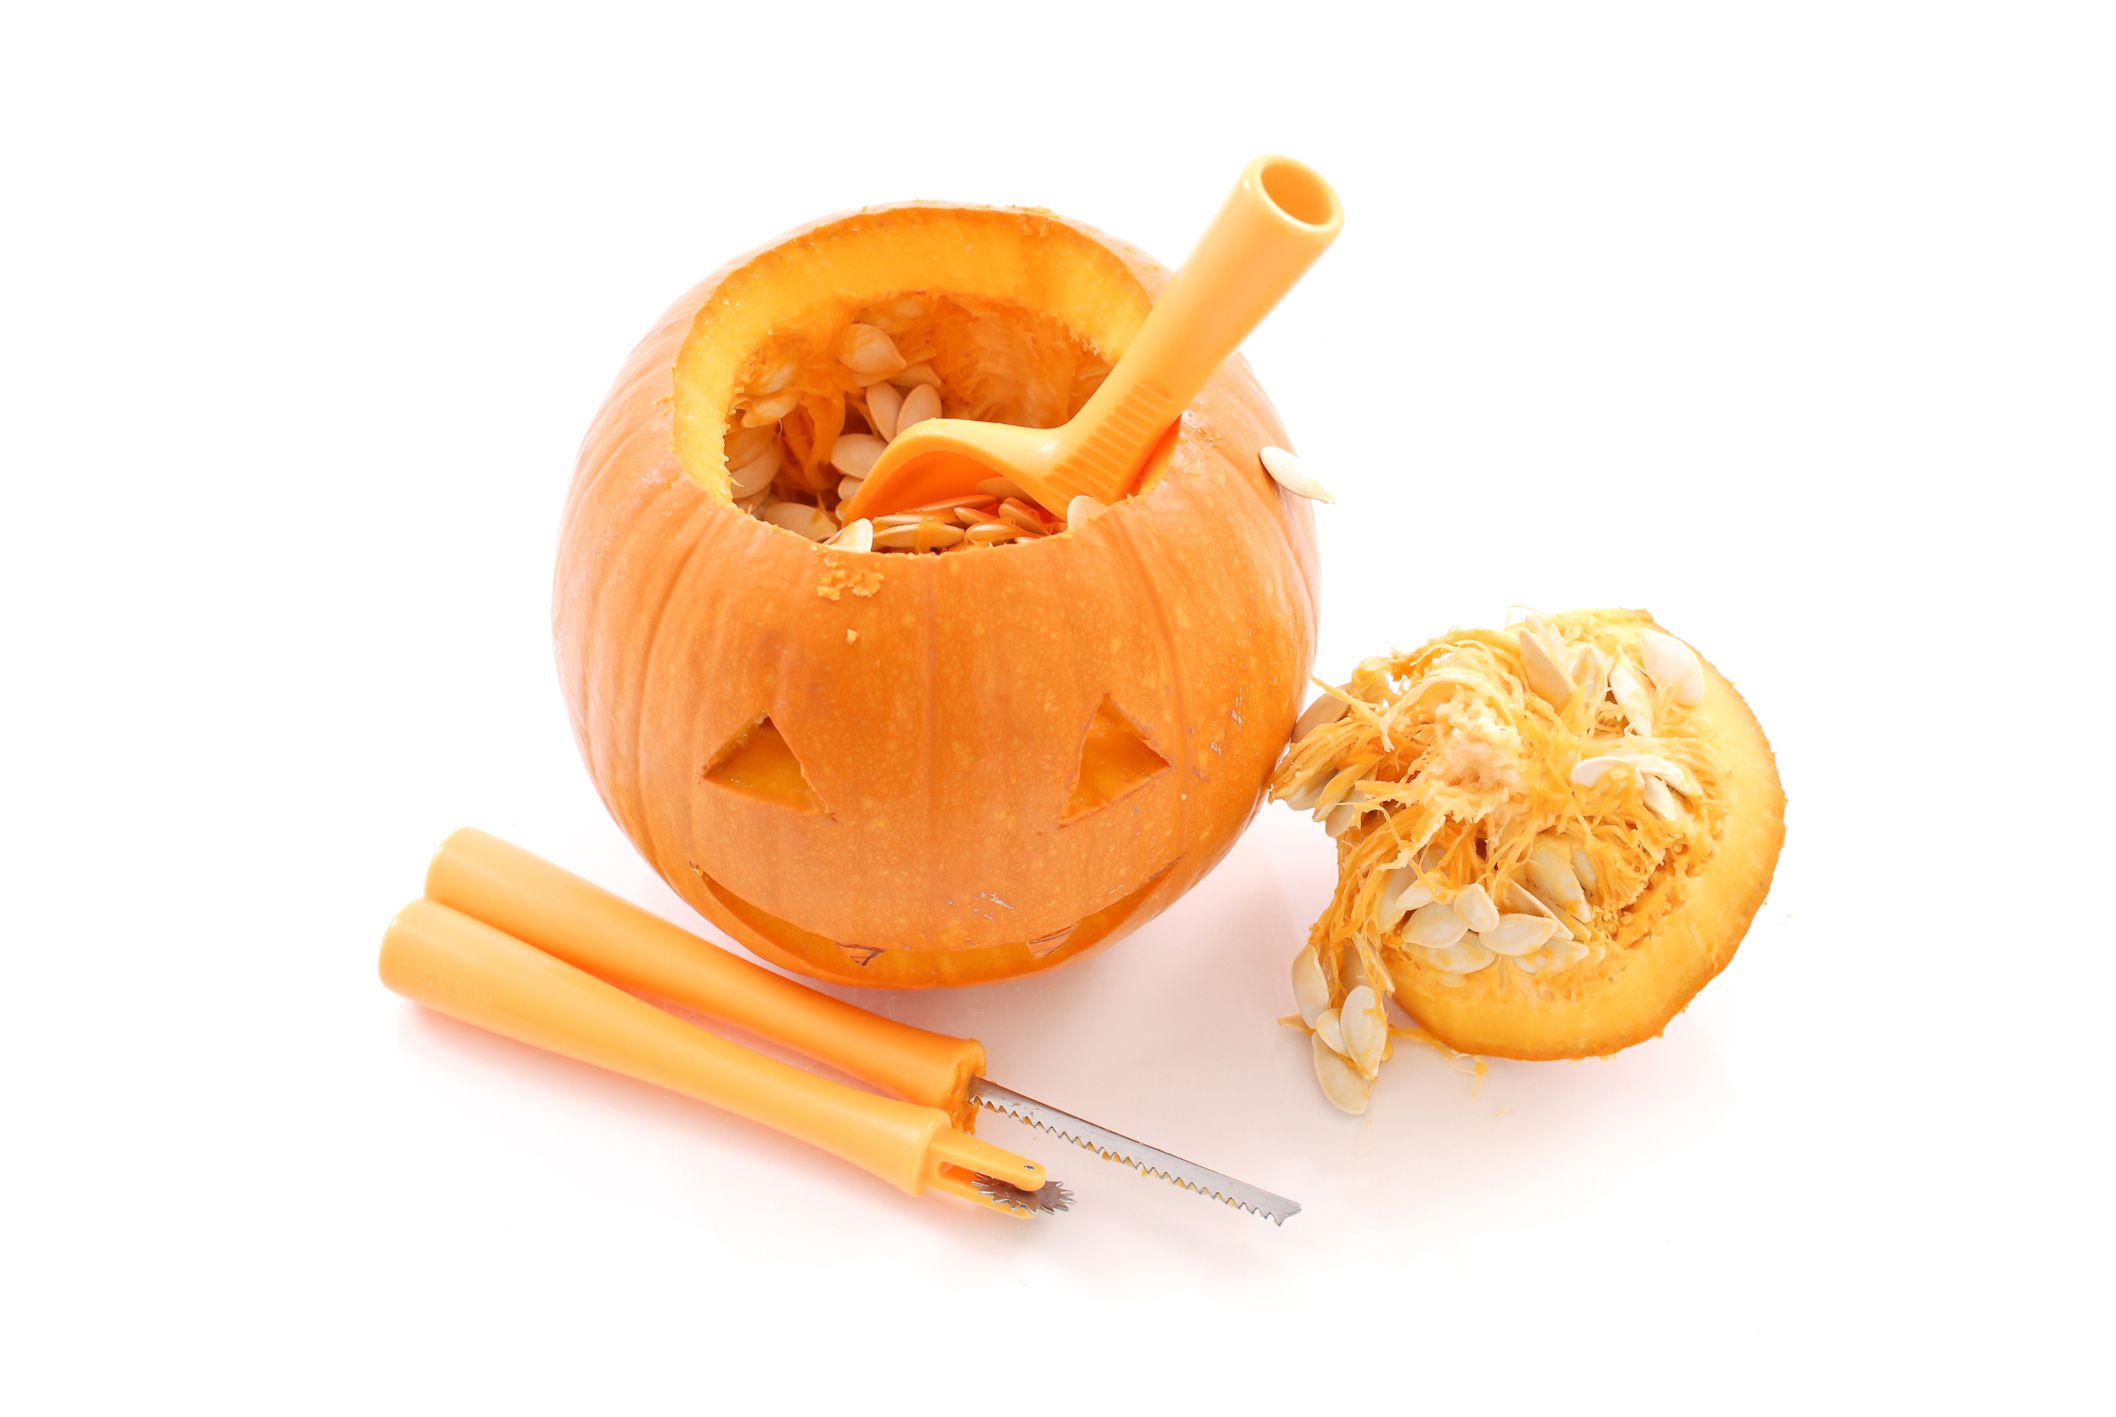 A pumpkin is depicted mid-carving, next to some tools.